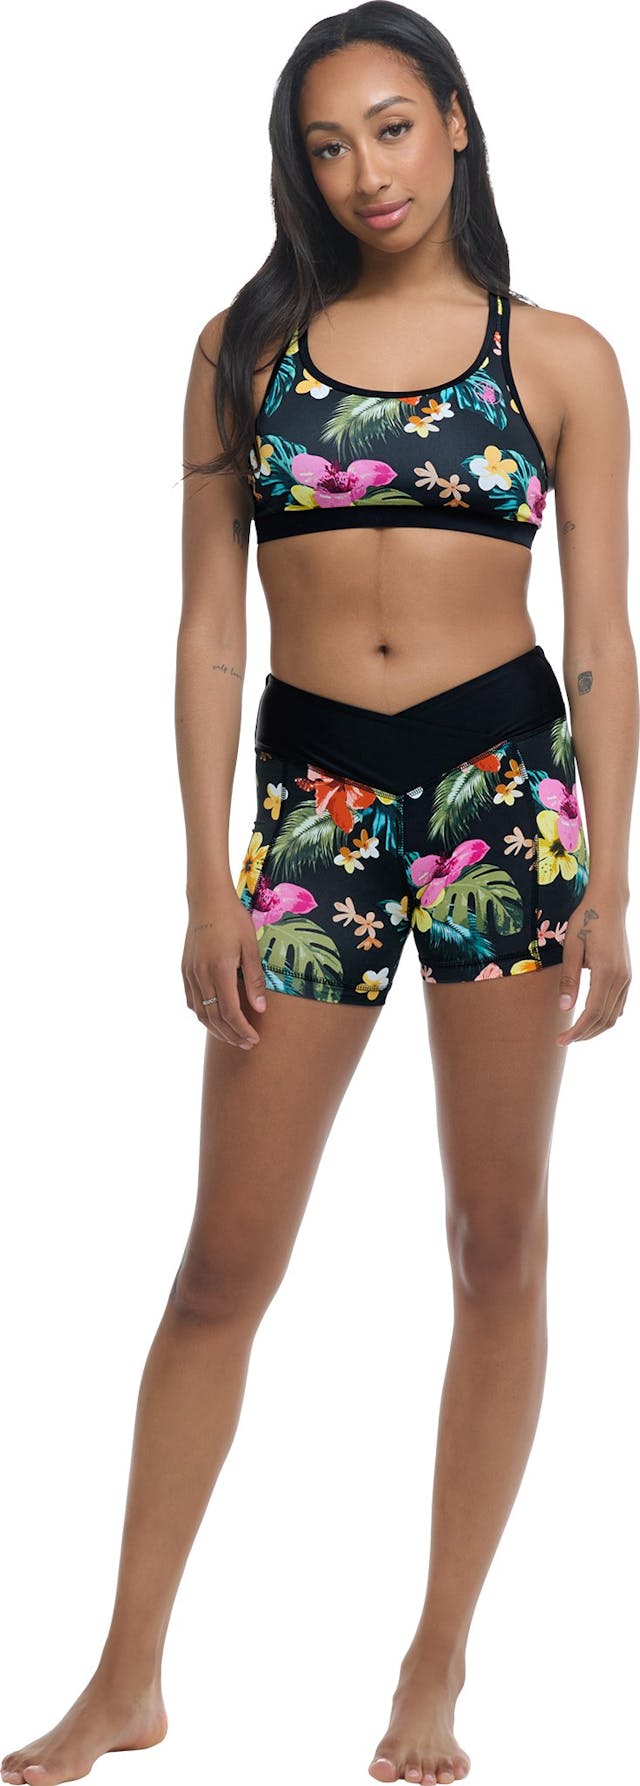 Product image for Tropical Island Speedy Cross-Over Shorts - Women's